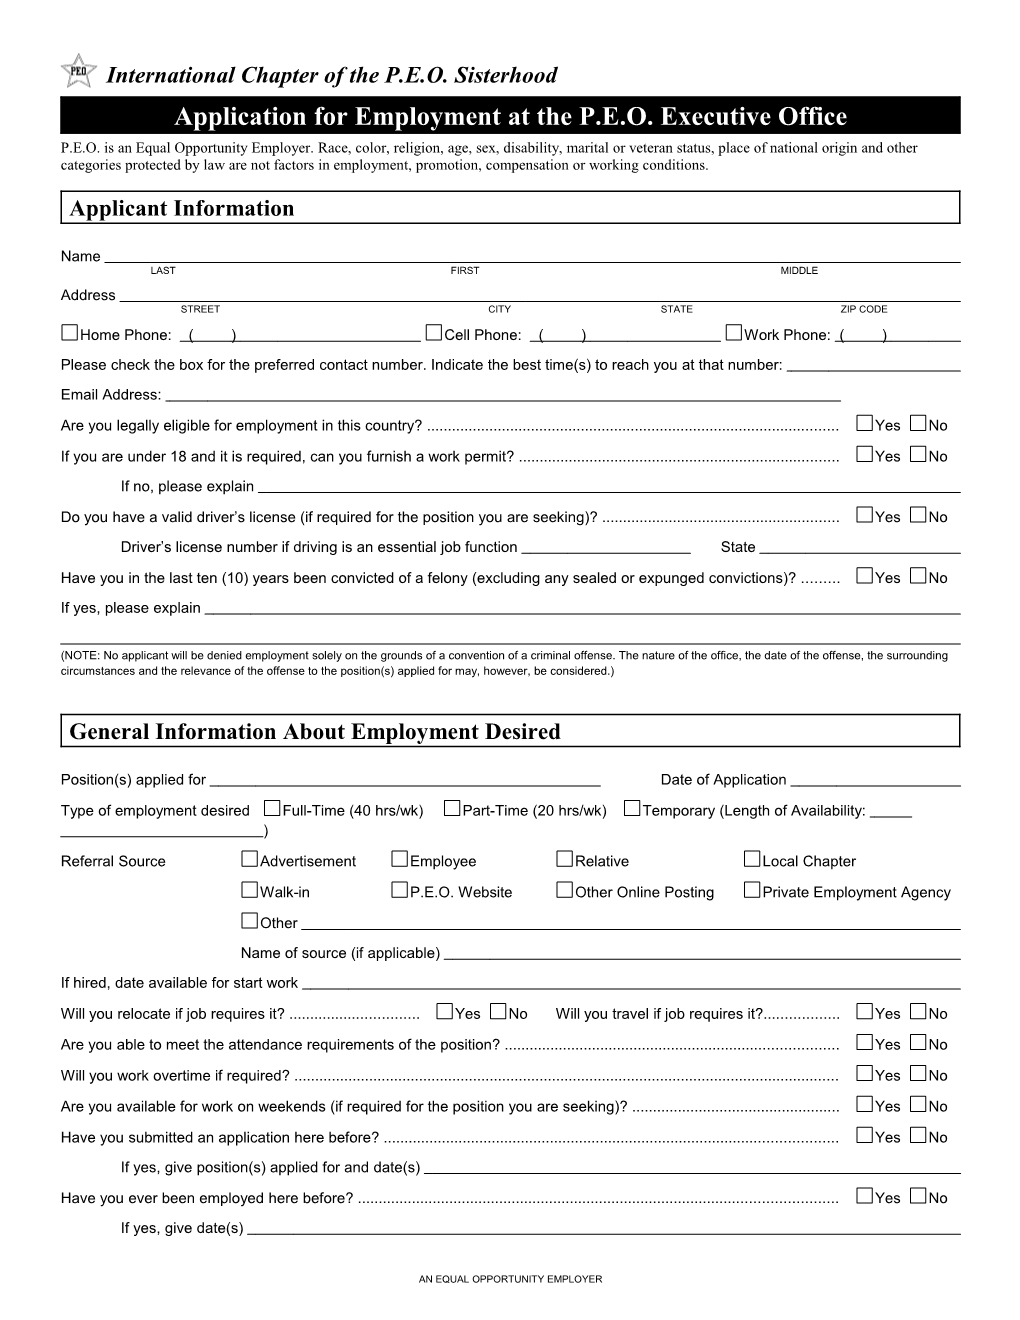 Application for Employment at the P.E.O. Executive Office